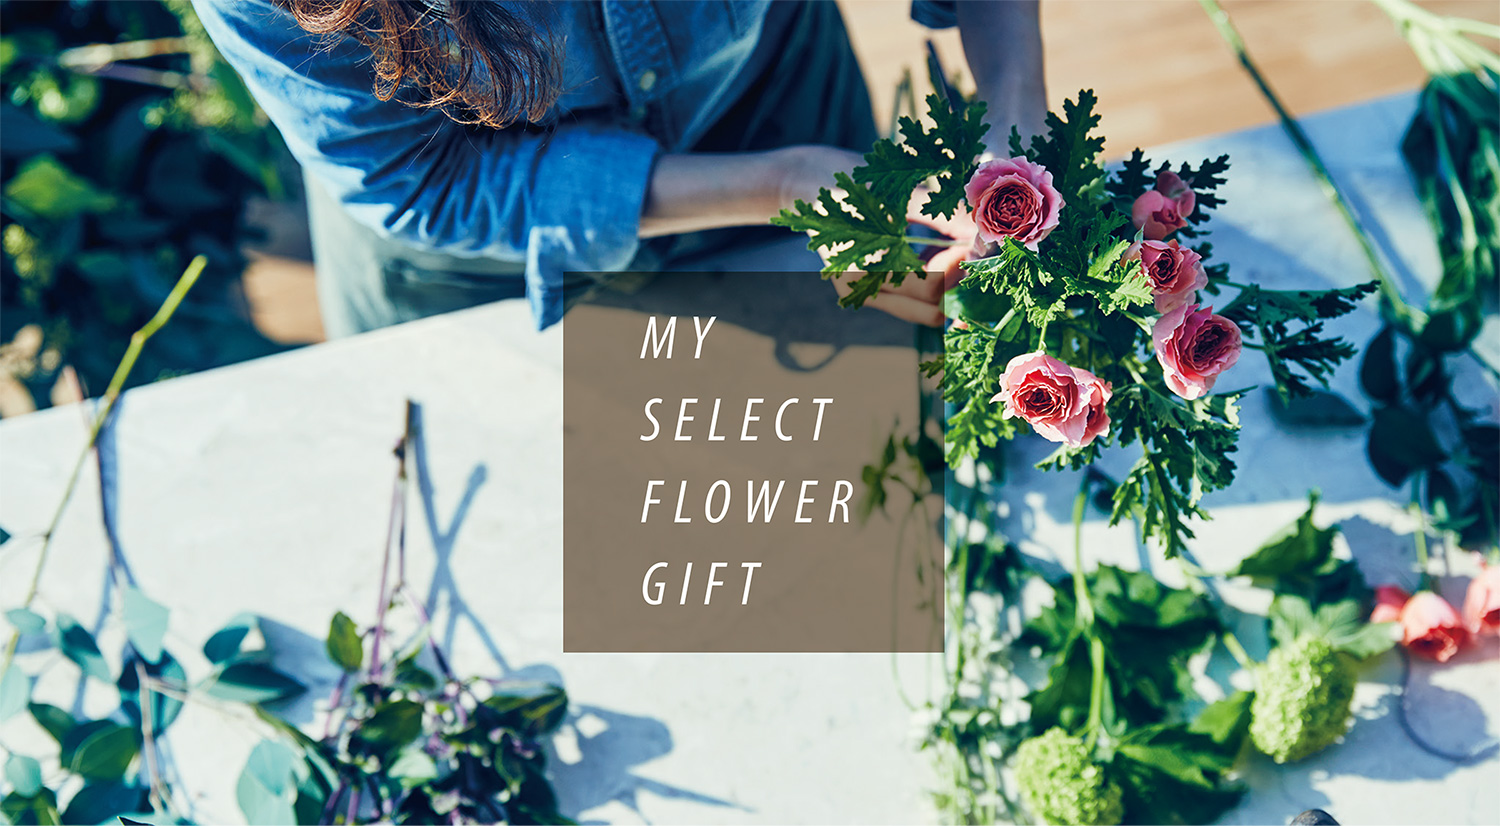 MY SELECT FLOWER GIFT